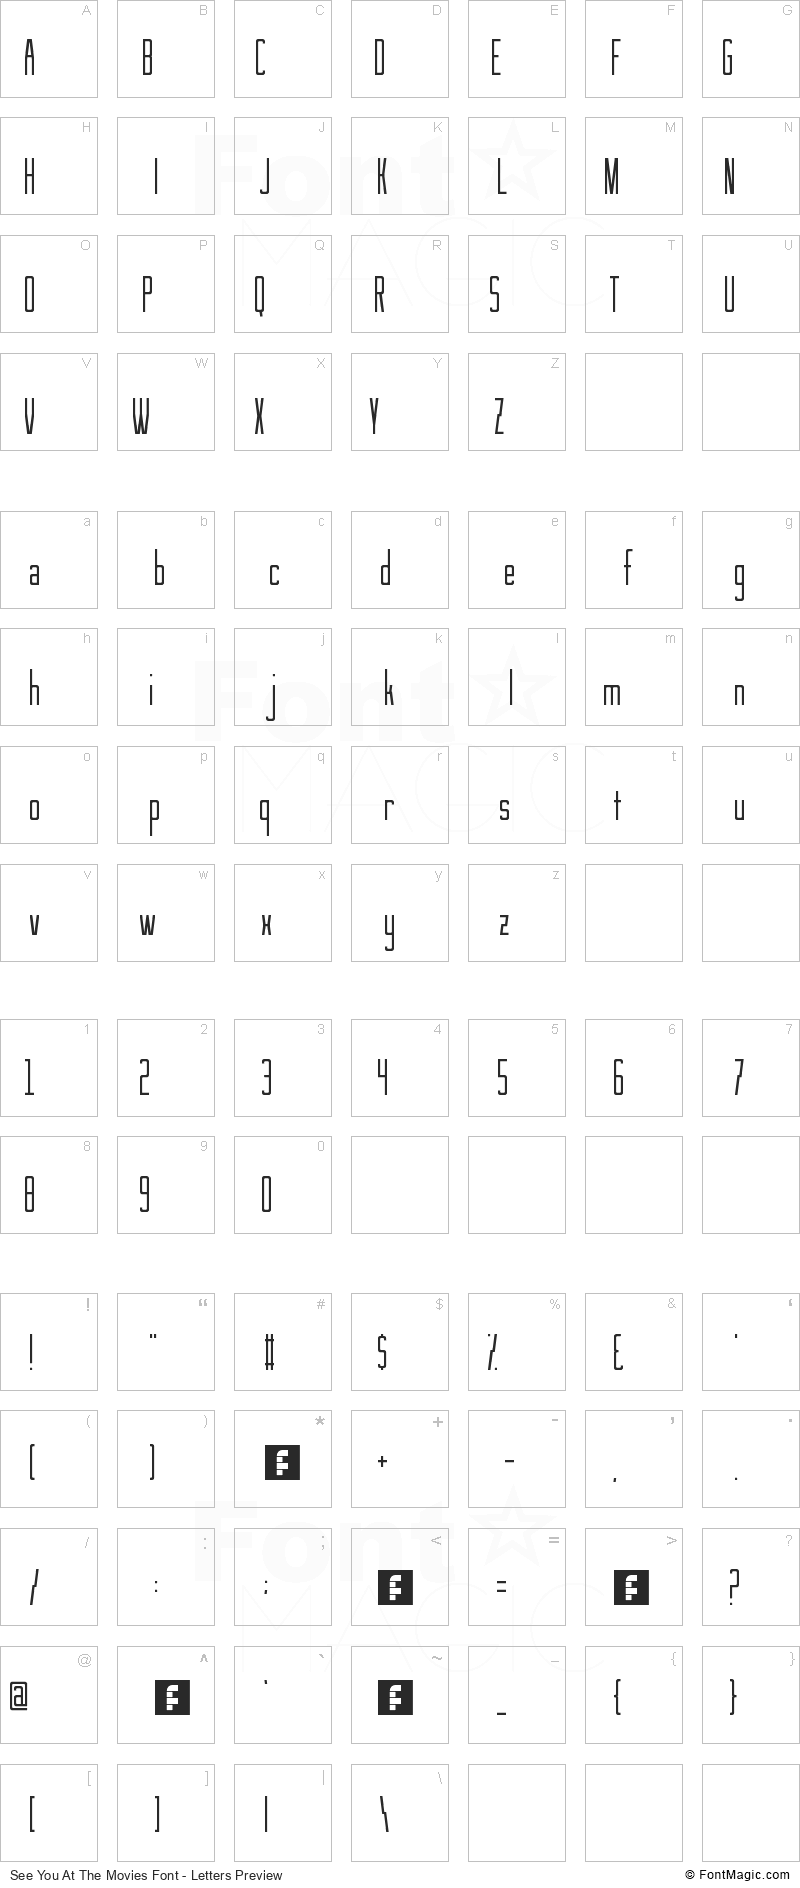 See You At The Movies Font - All Latters Preview Chart